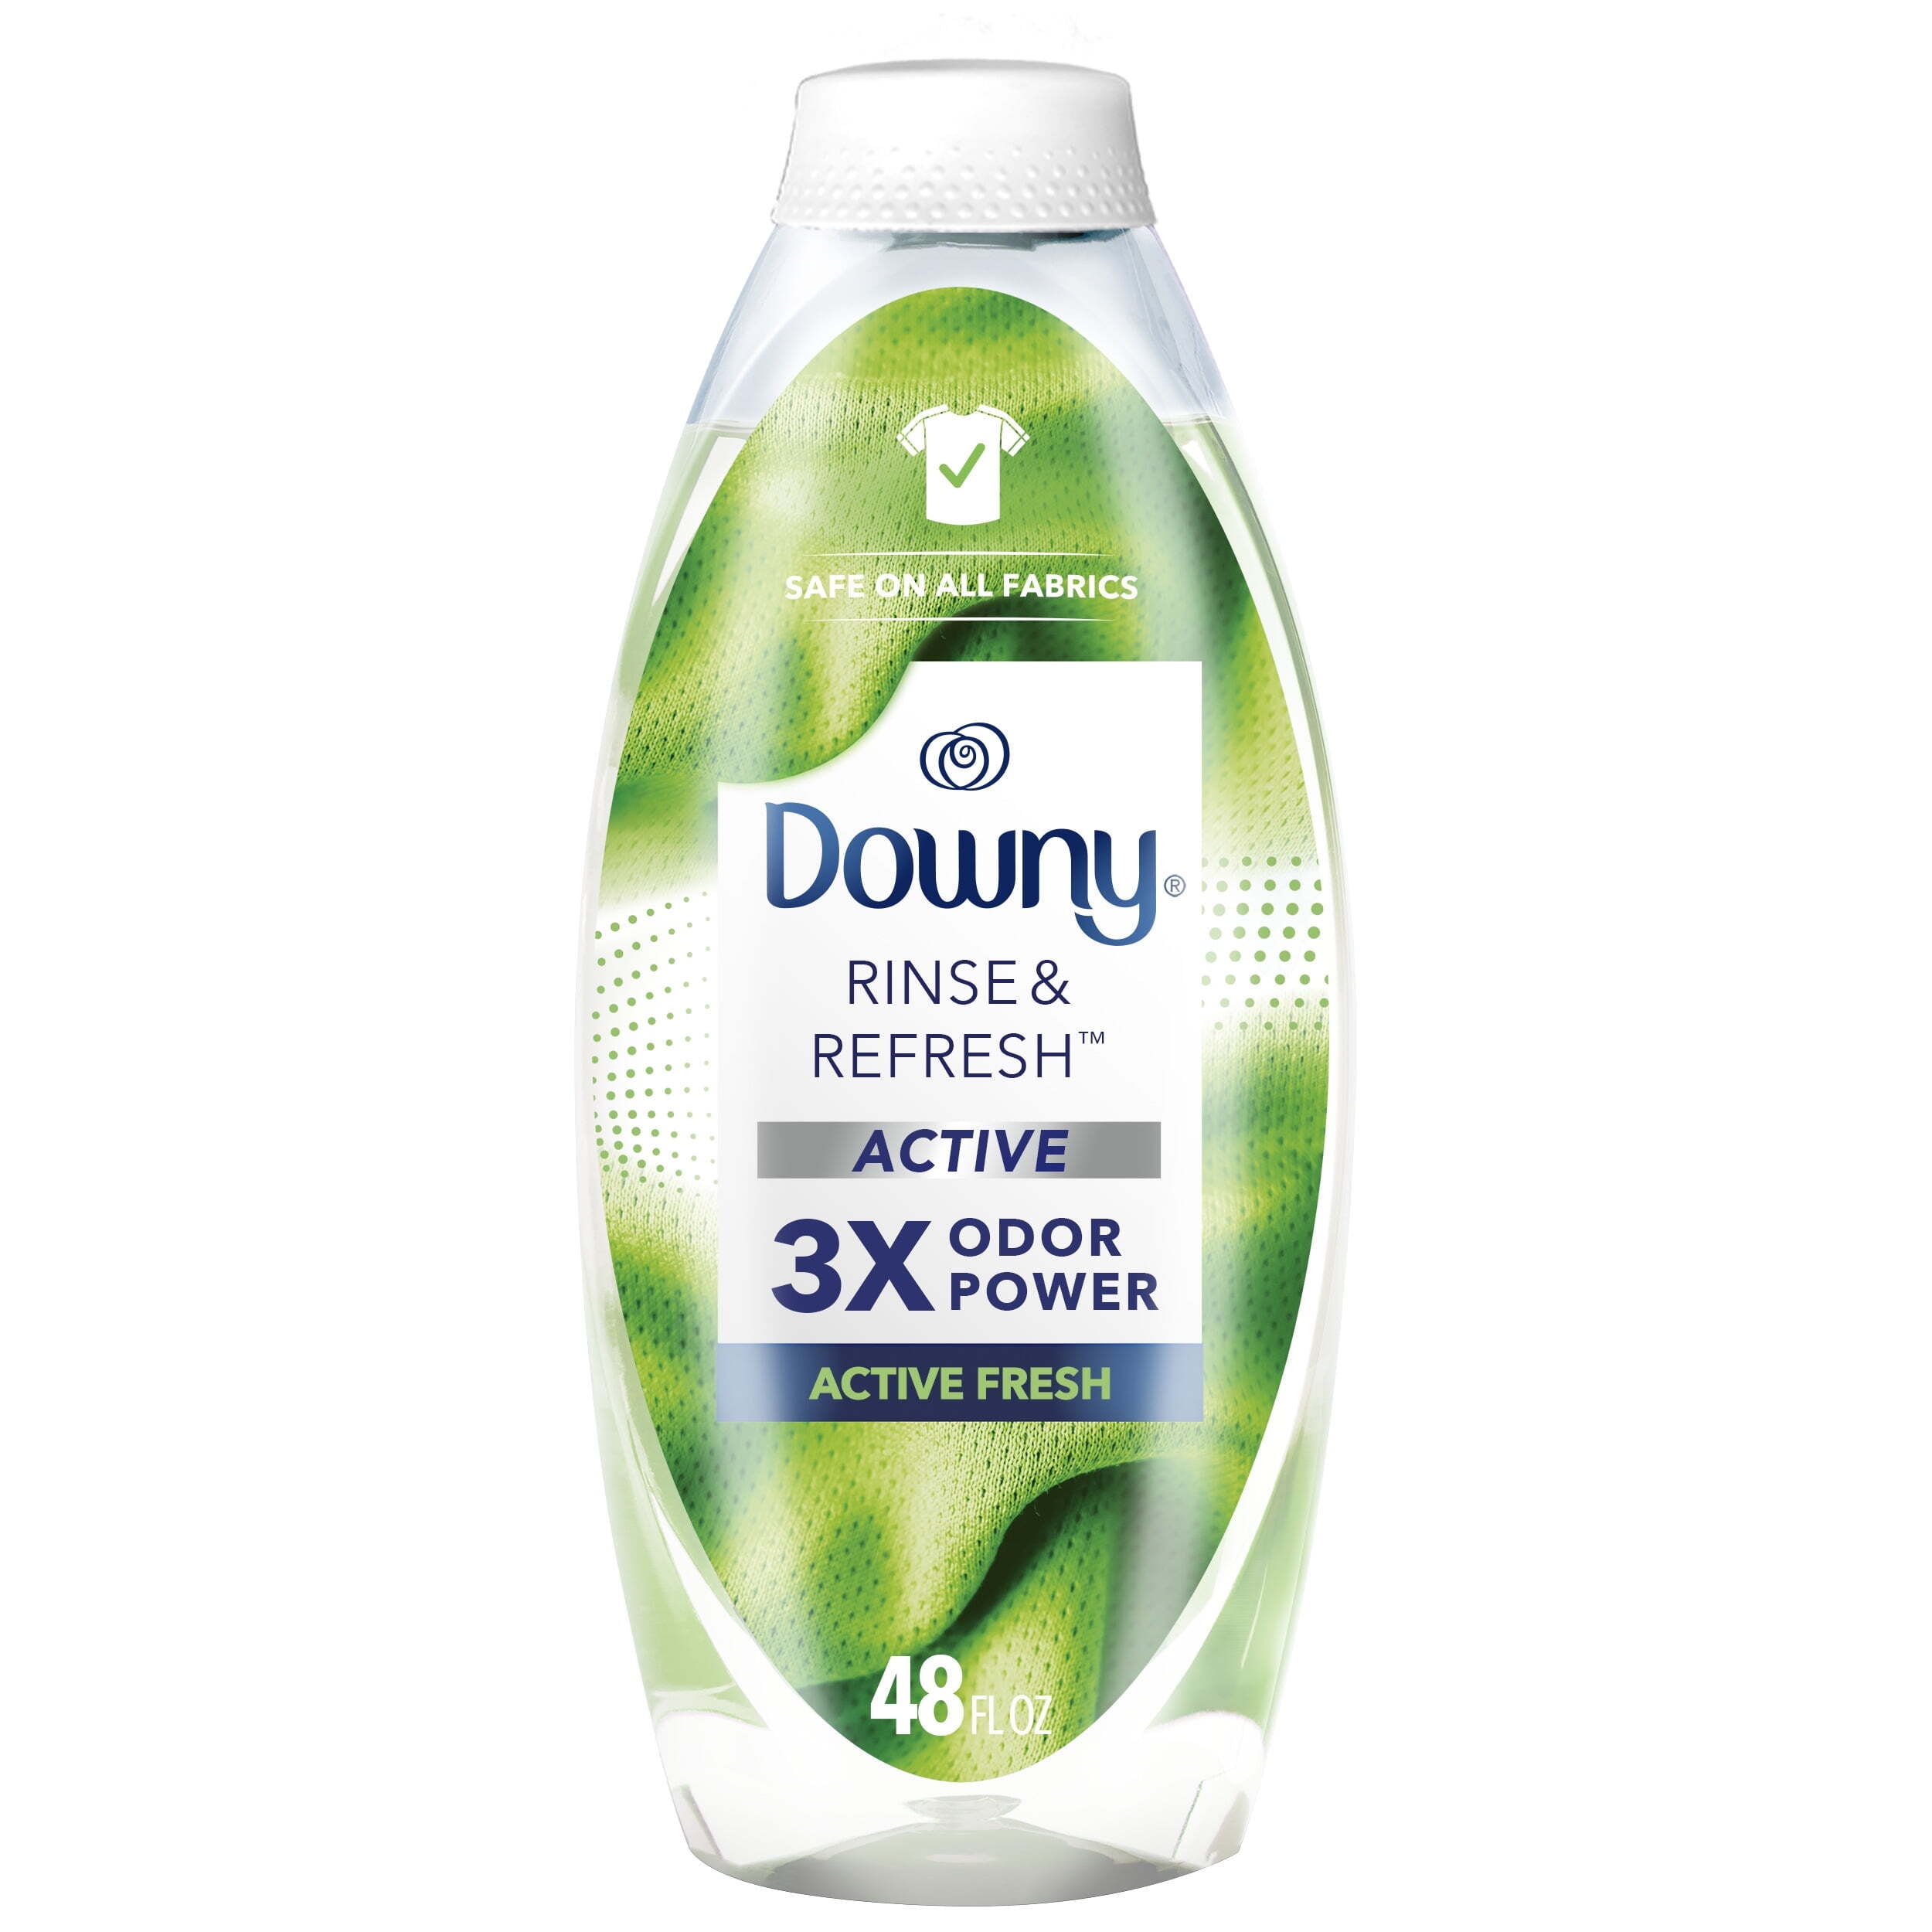 2 Packs 37.5 oz Downy Unstopables In-Wash Scent Booster Beads, Fresh